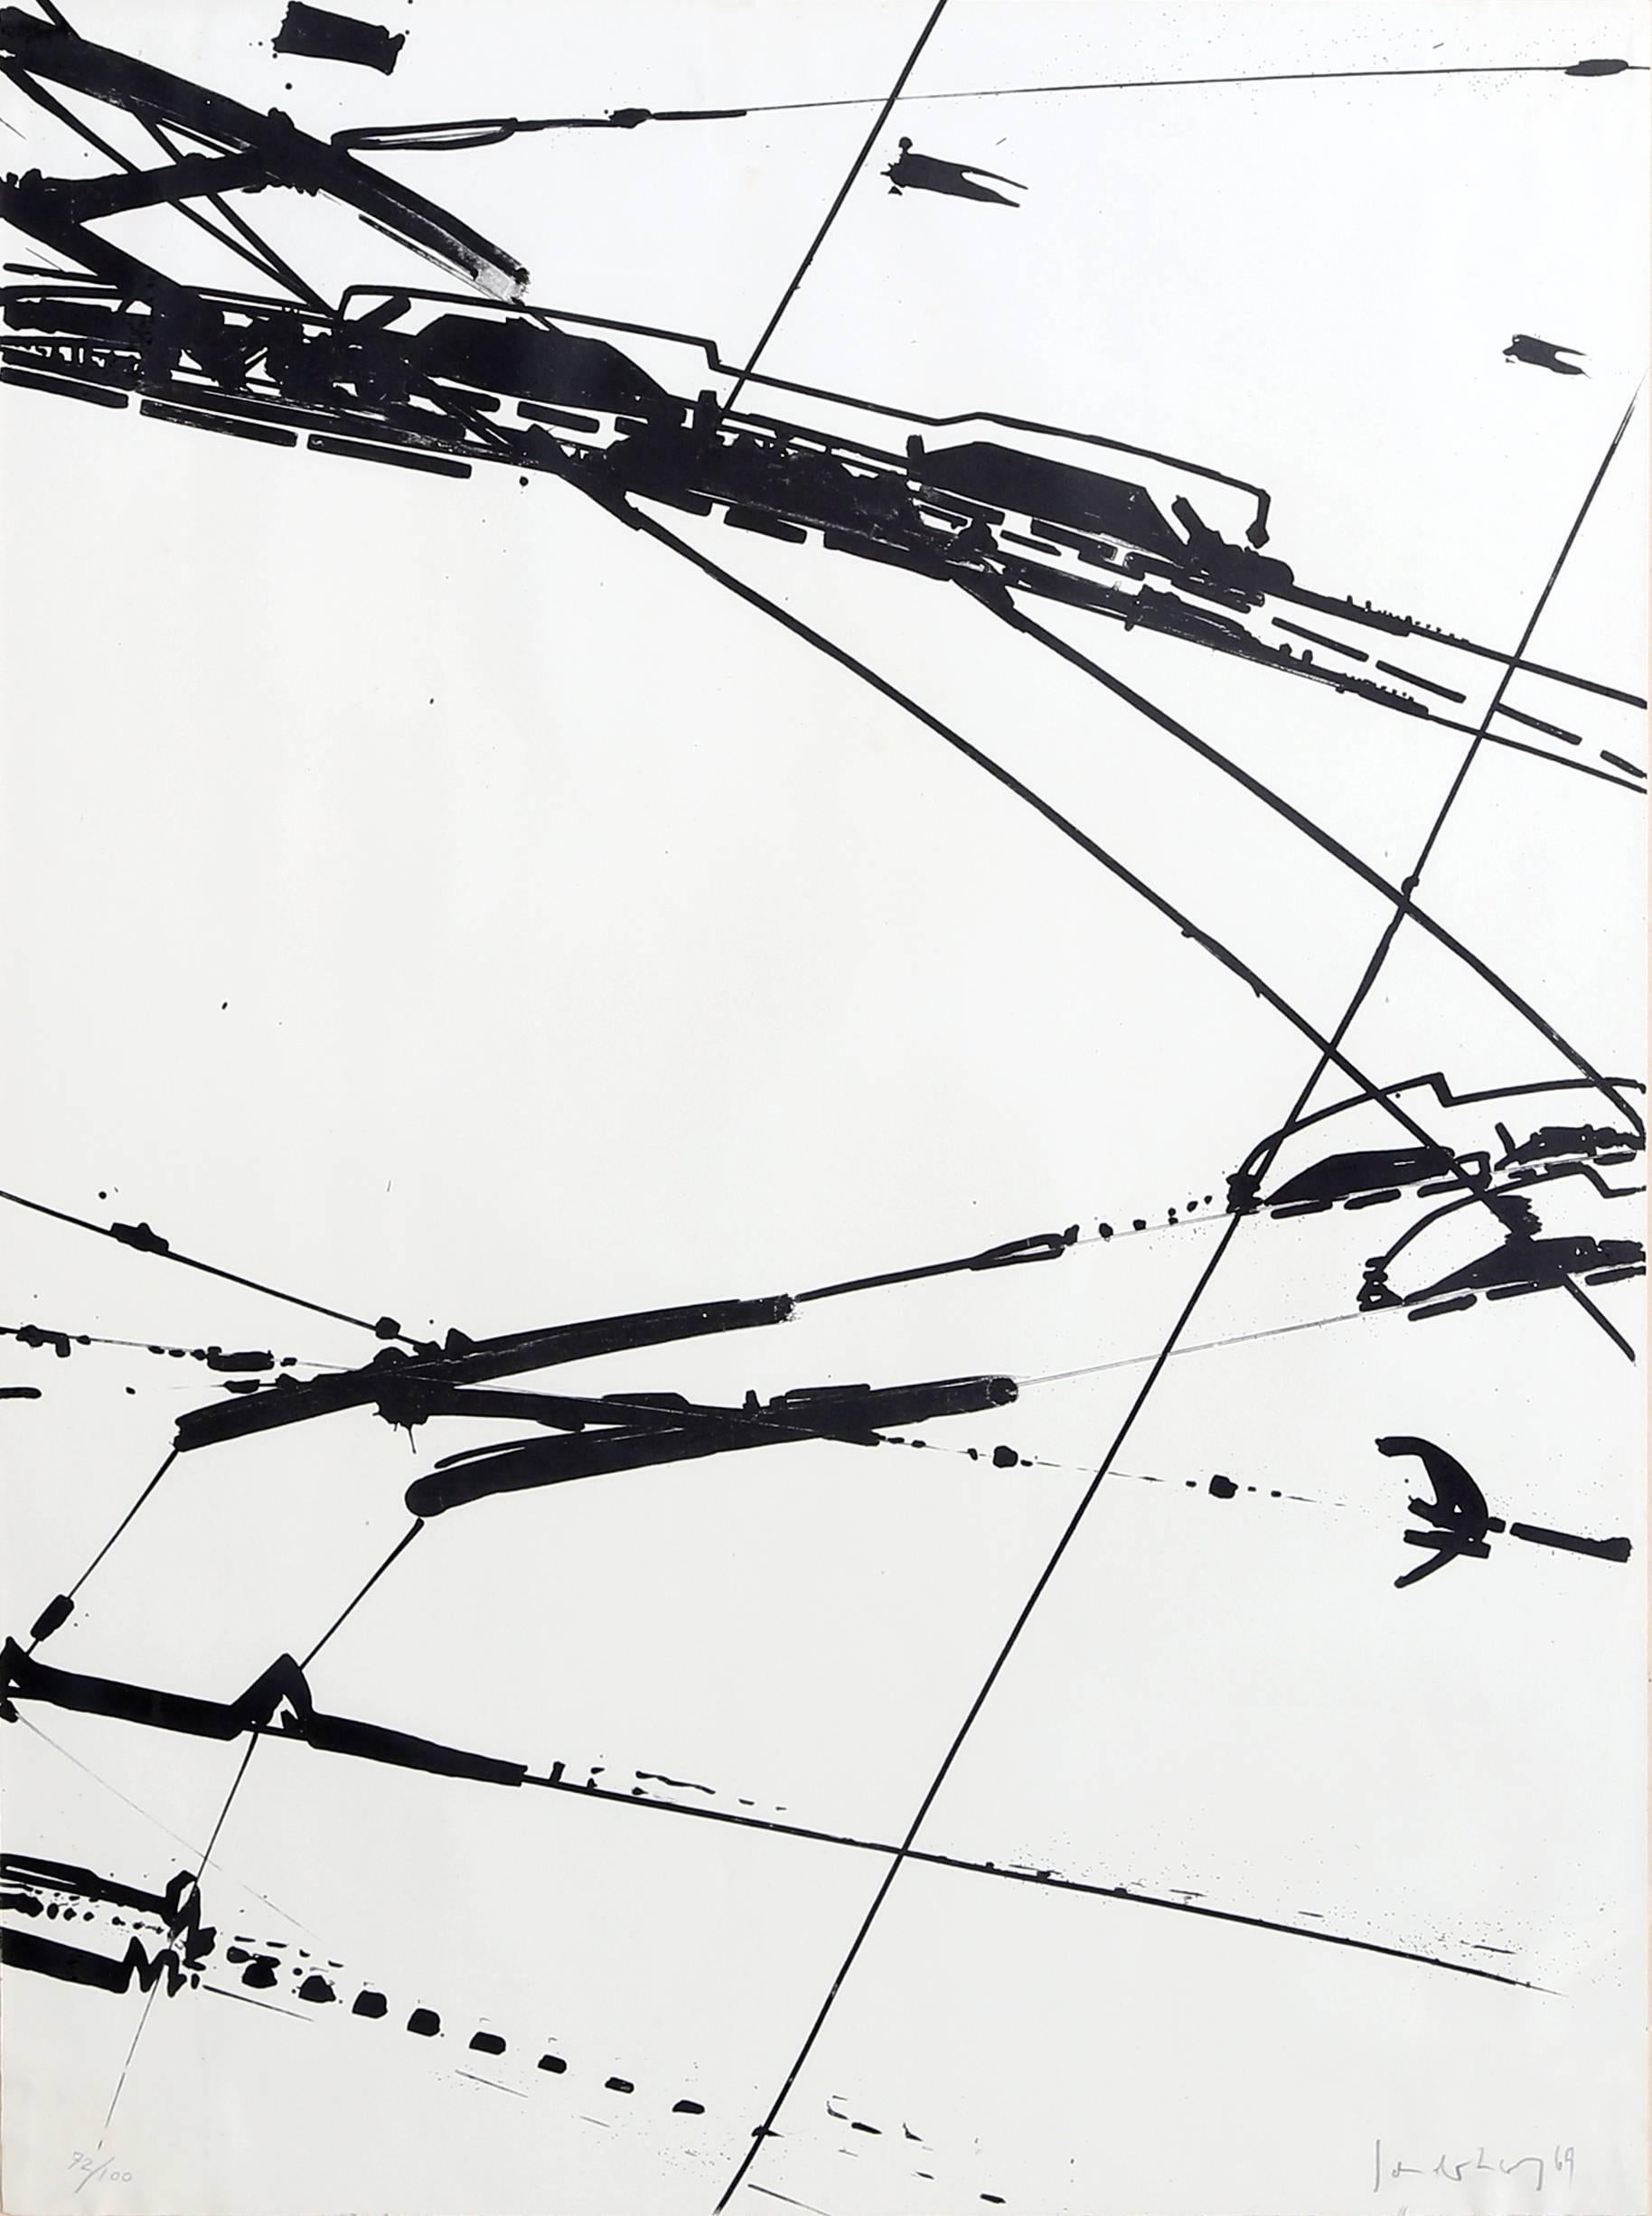 K.R.H. Sonderborg Abstract Print - Untitled, Black and White Abstract Lithograph, 1969